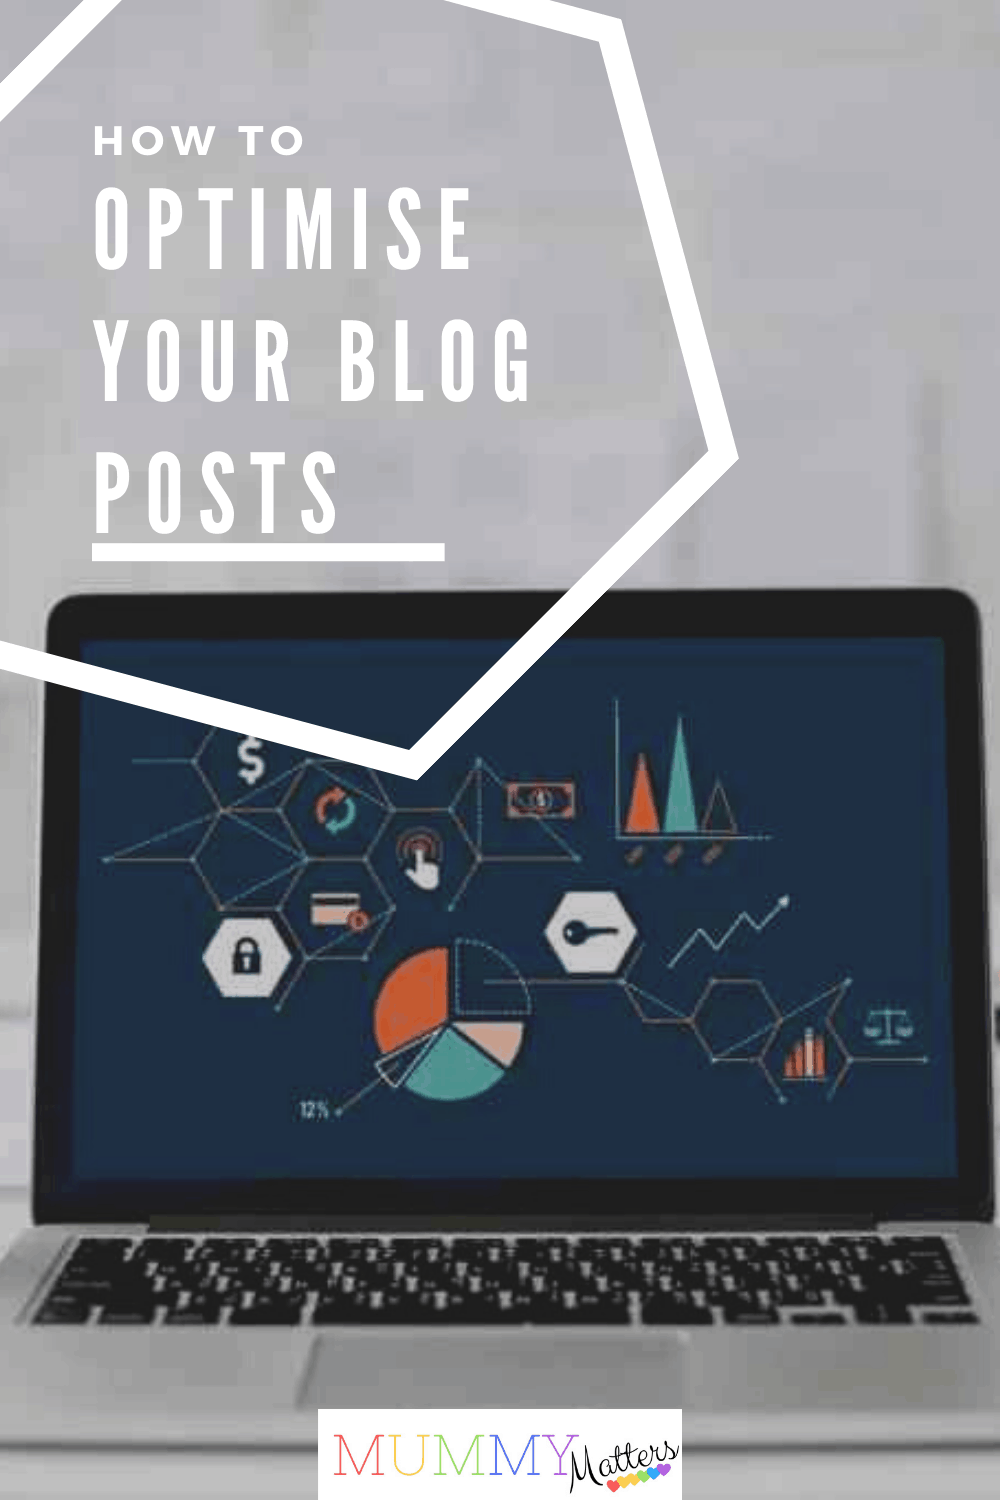 SEO is part of my daily practice and should be part of yours. Here are a few tips on how to optimise your blog posts for SEO.